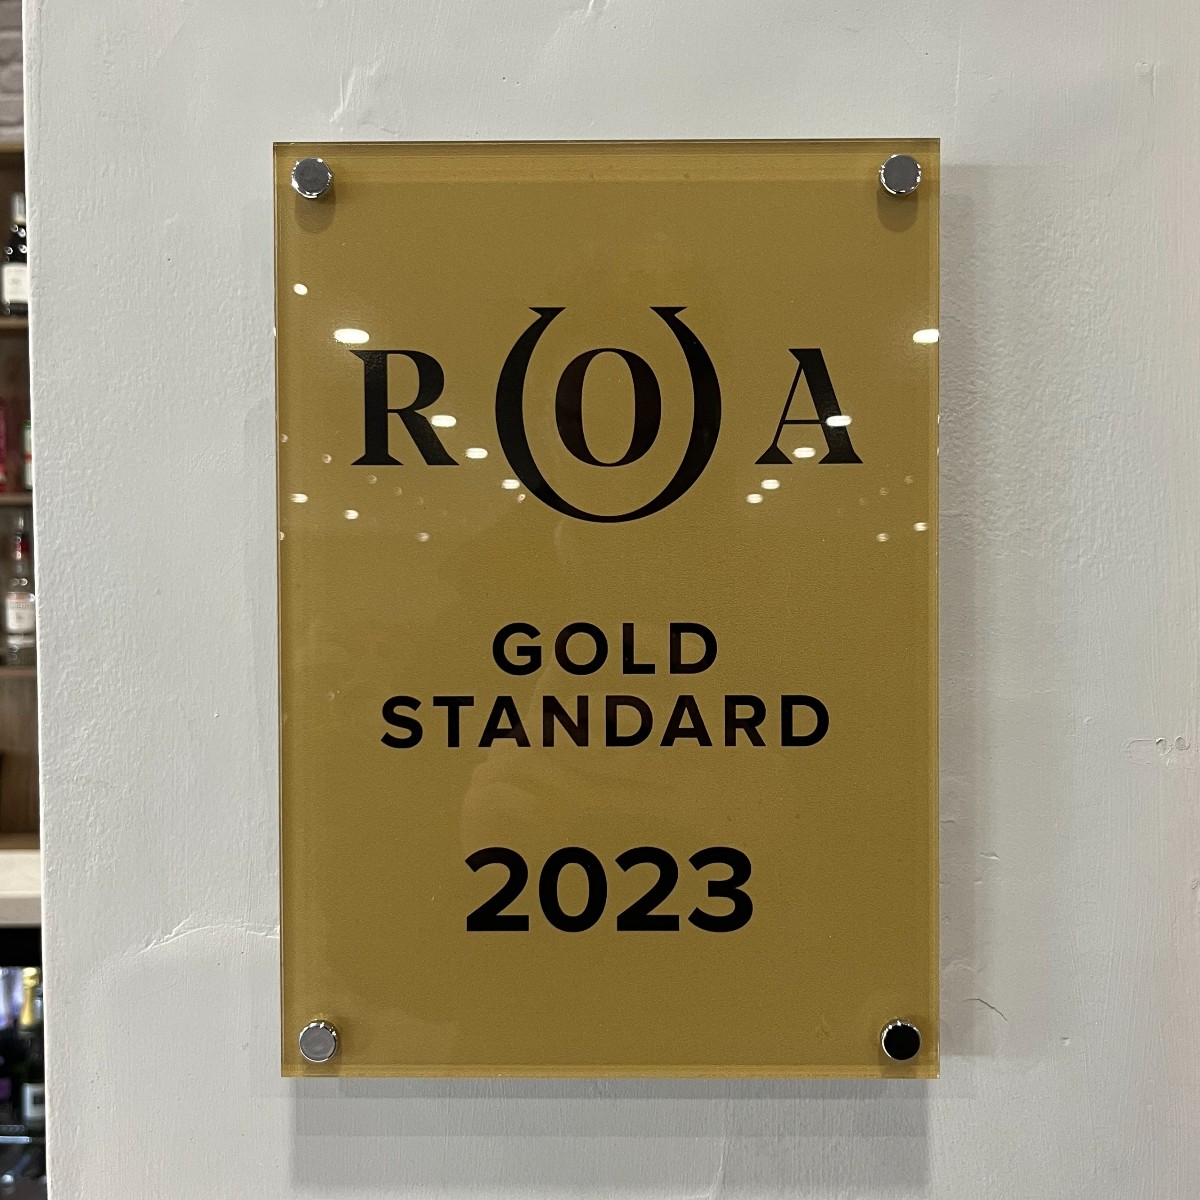 We are proud to share our Gold Standard award in the 2023 Racehorse Owners Association (ROA) Racecourse Accreditation Scheme in our Owners & Trainers Pavilion 🥇 Congratulations to our team who achieved a quality score of over 80% and an owner feedback score of 4 or more 👏